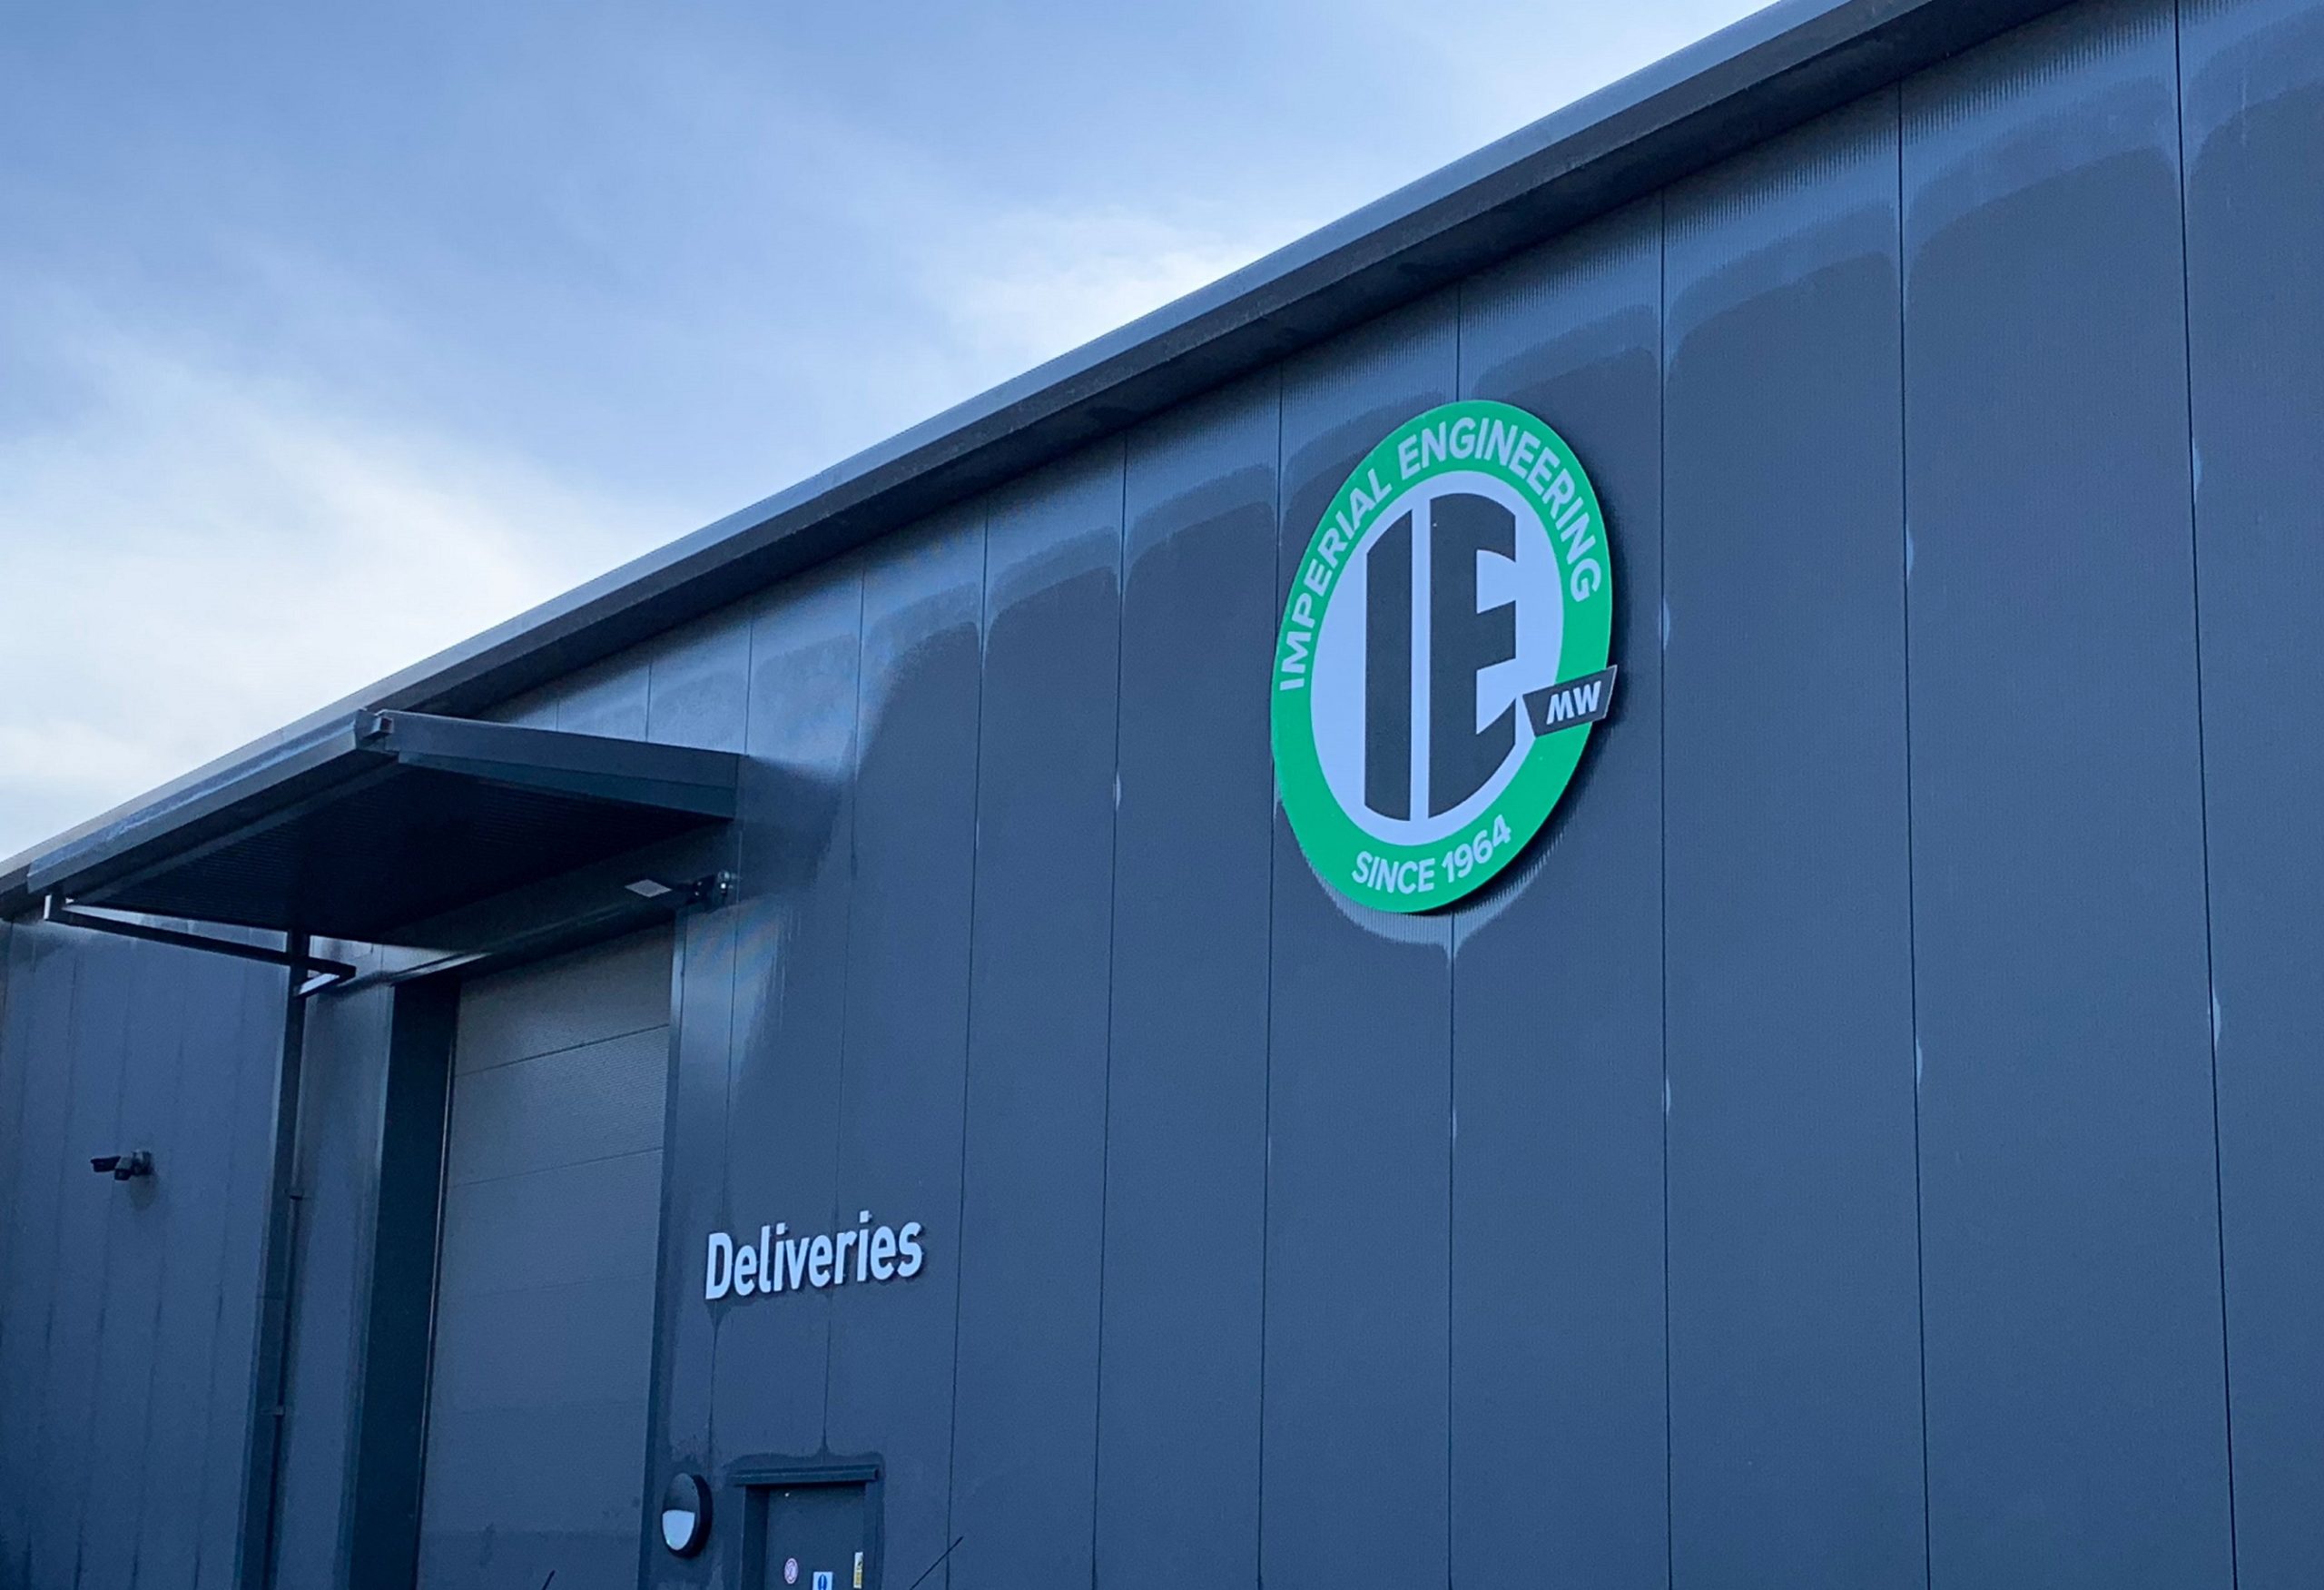 Imperial Engineering moves to larger premises in Harlow